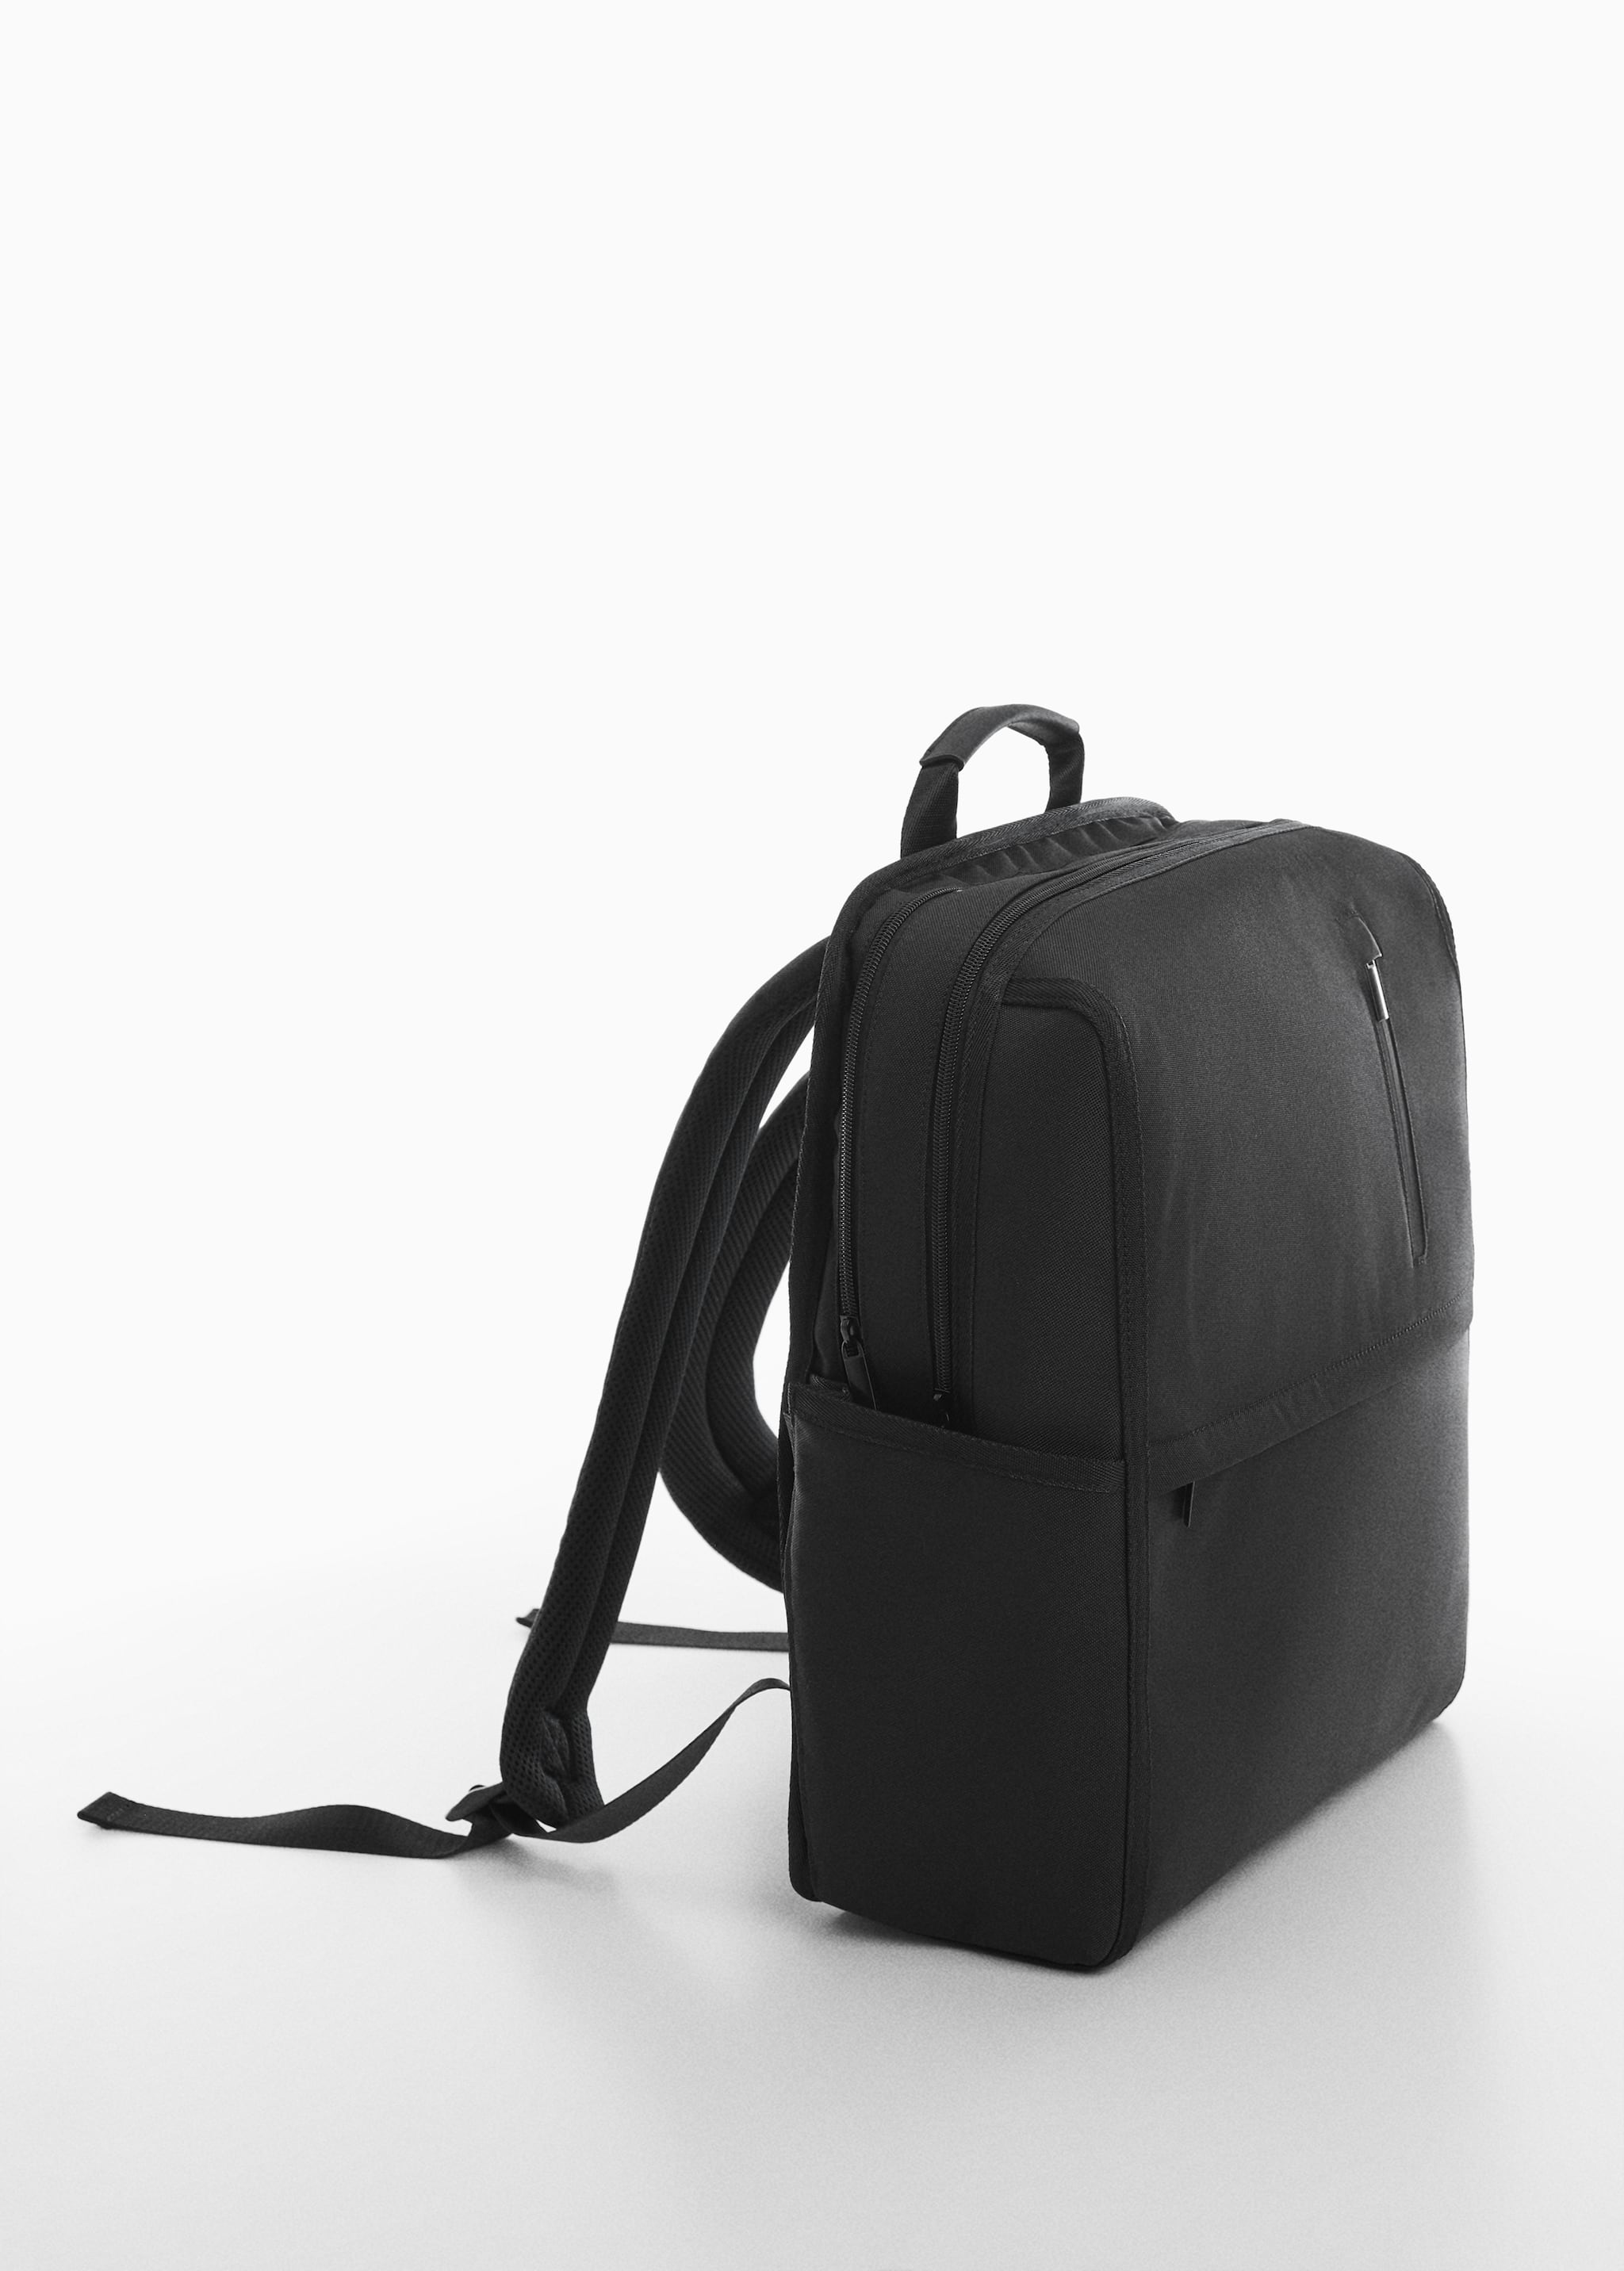 Backpack with leather-effect details - Medium plane